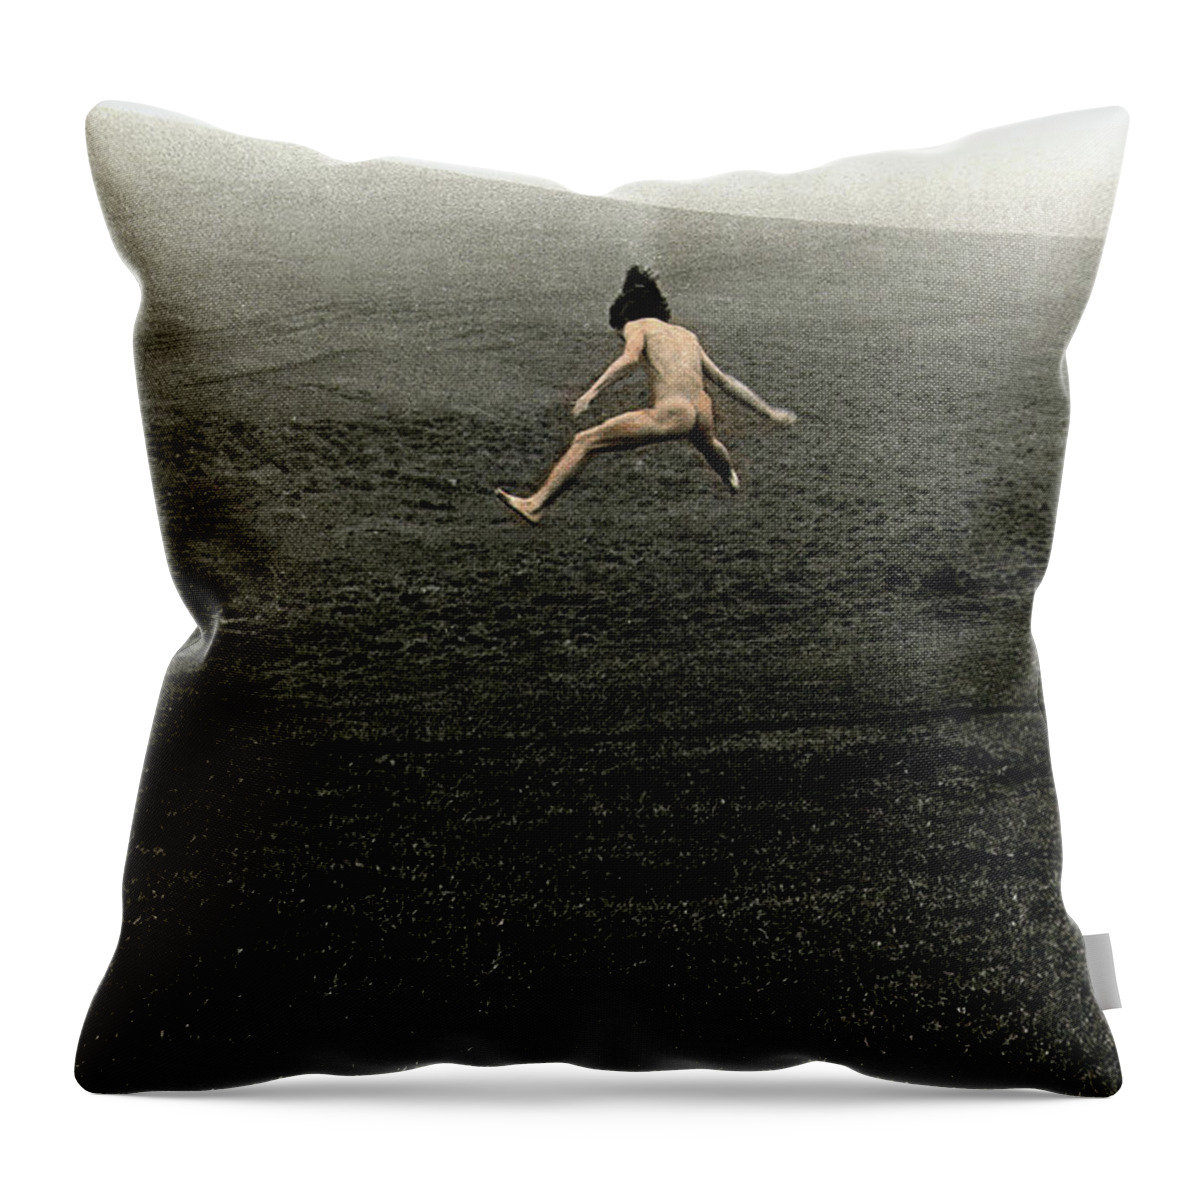 Spring Throw Pillow featuring the photograph Spring by Wayne King